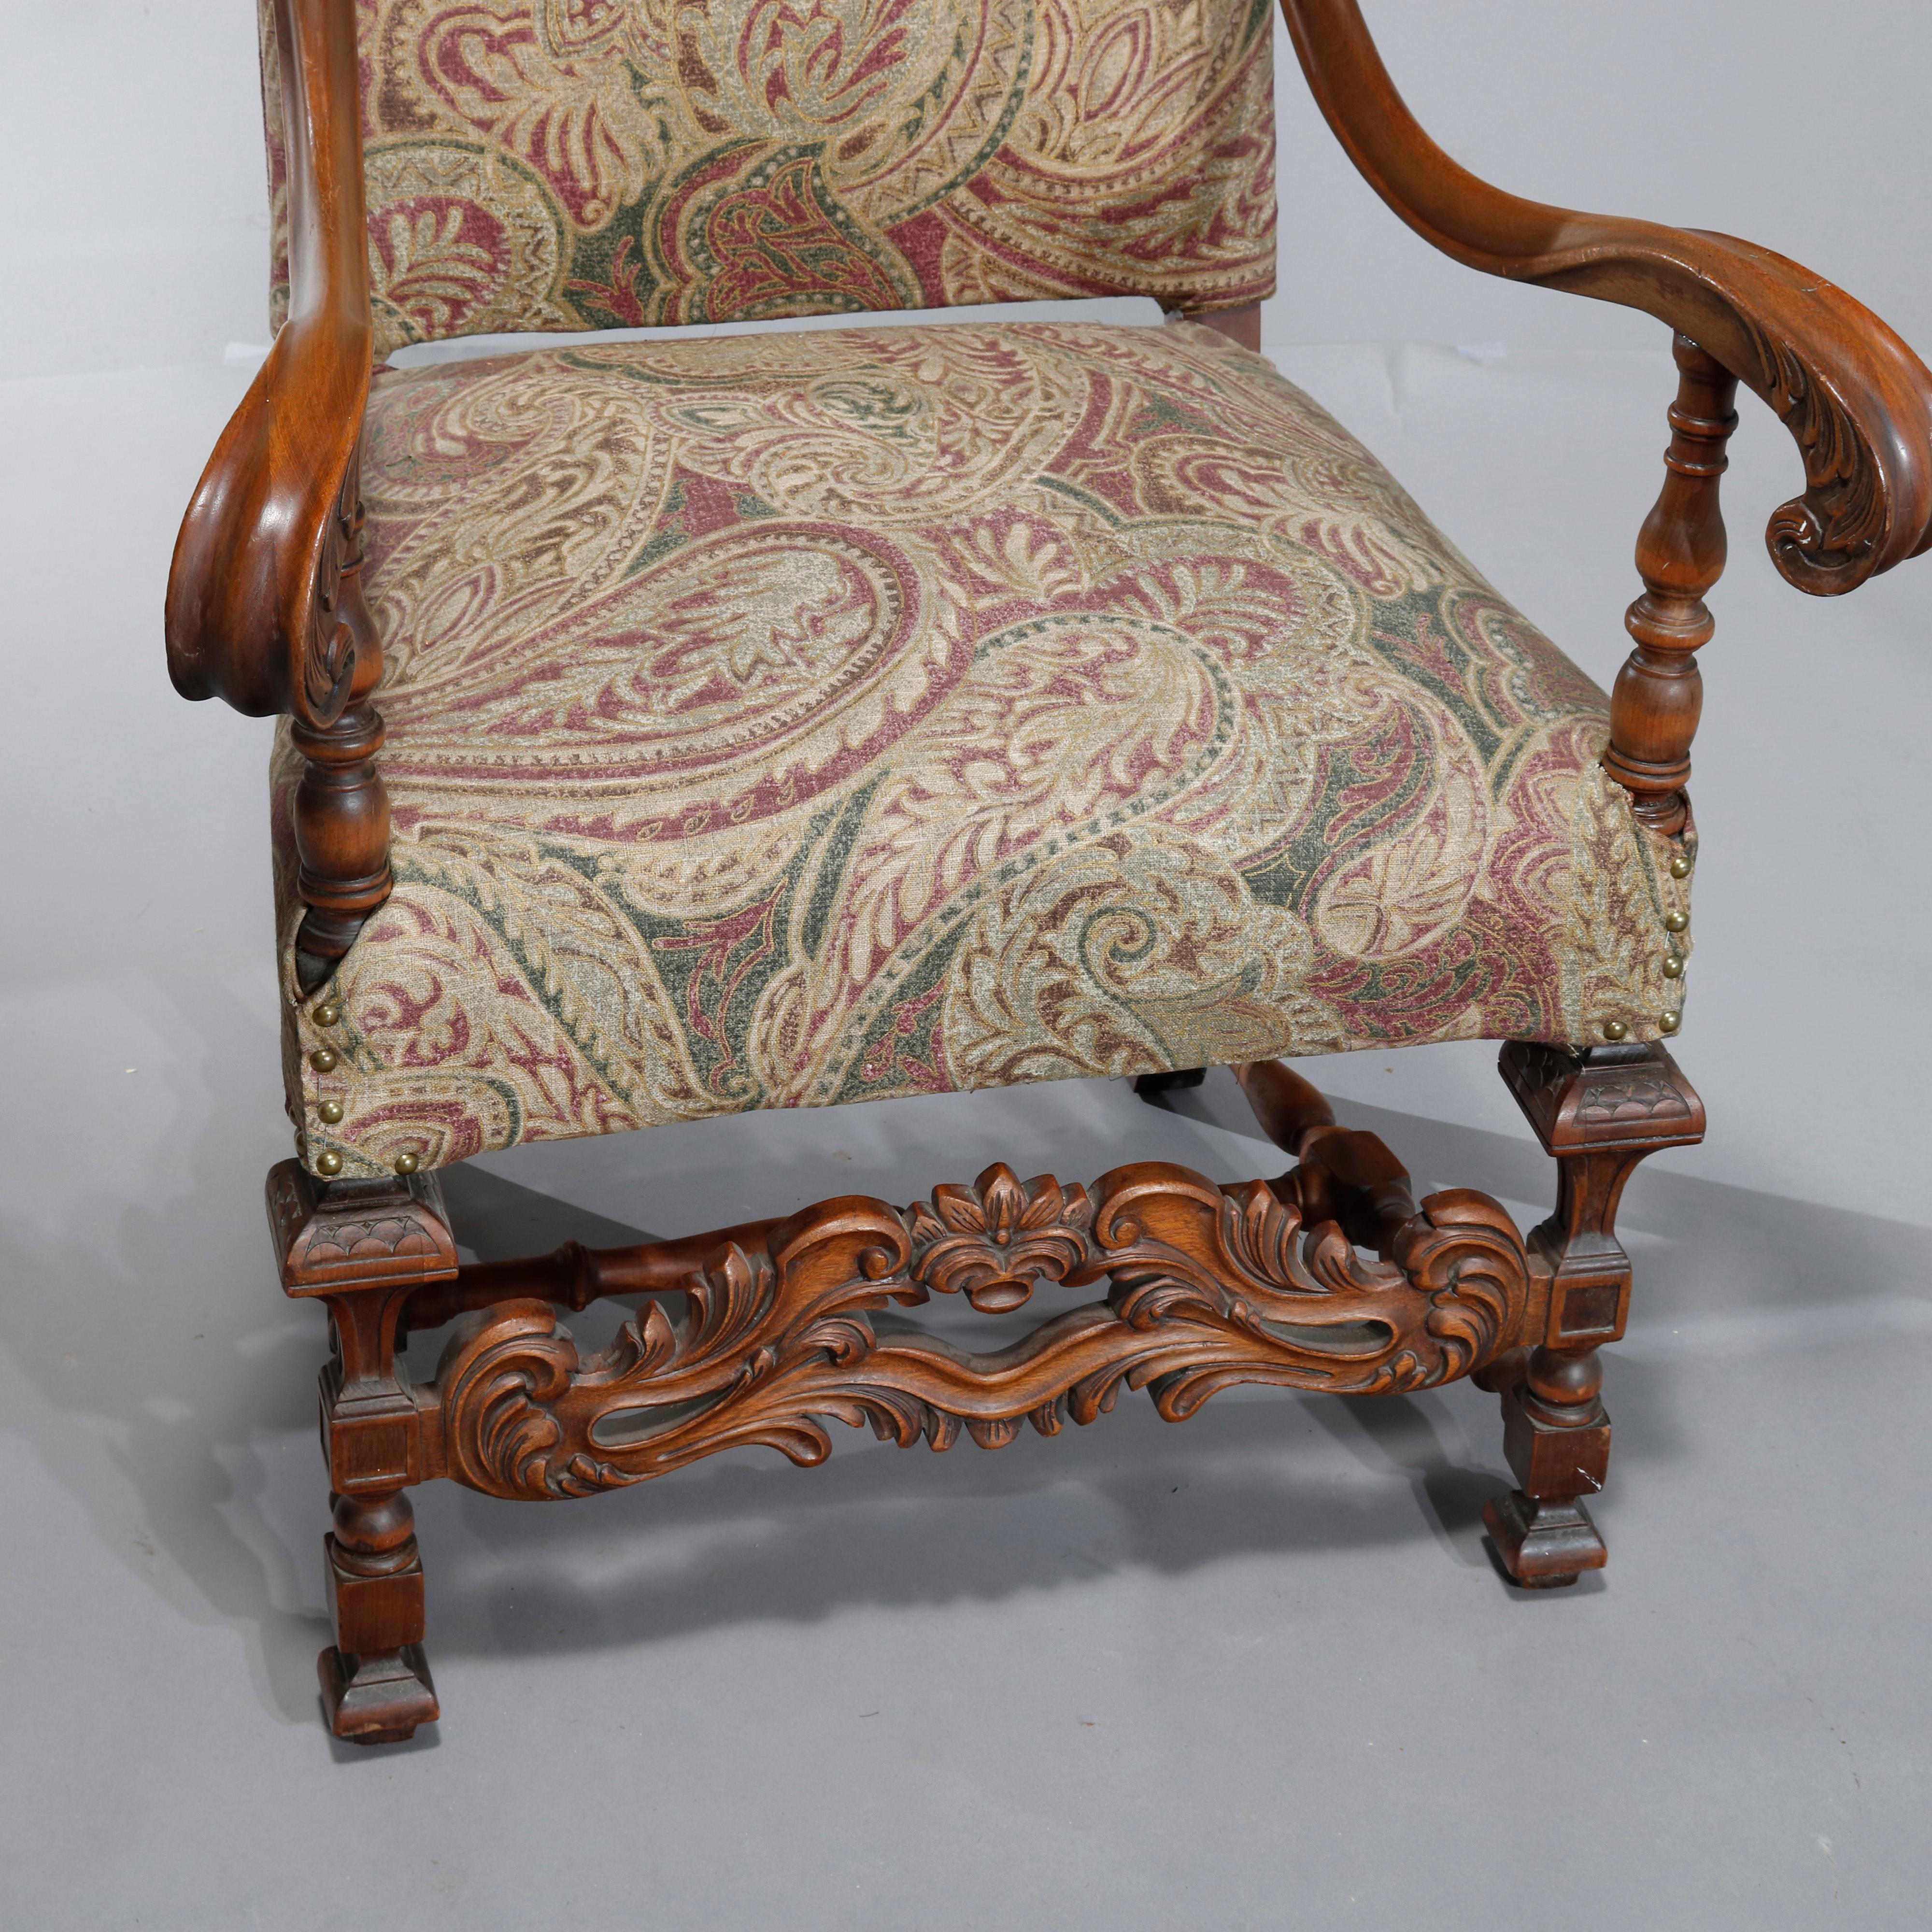 An antique Italian Renaissance Revival tall back throne chair offers walnut frame having shaped back and scroll form arms surmounting seat raised on balustrade legs with carved foliate and scroll stretcher, upholstered seat and back,